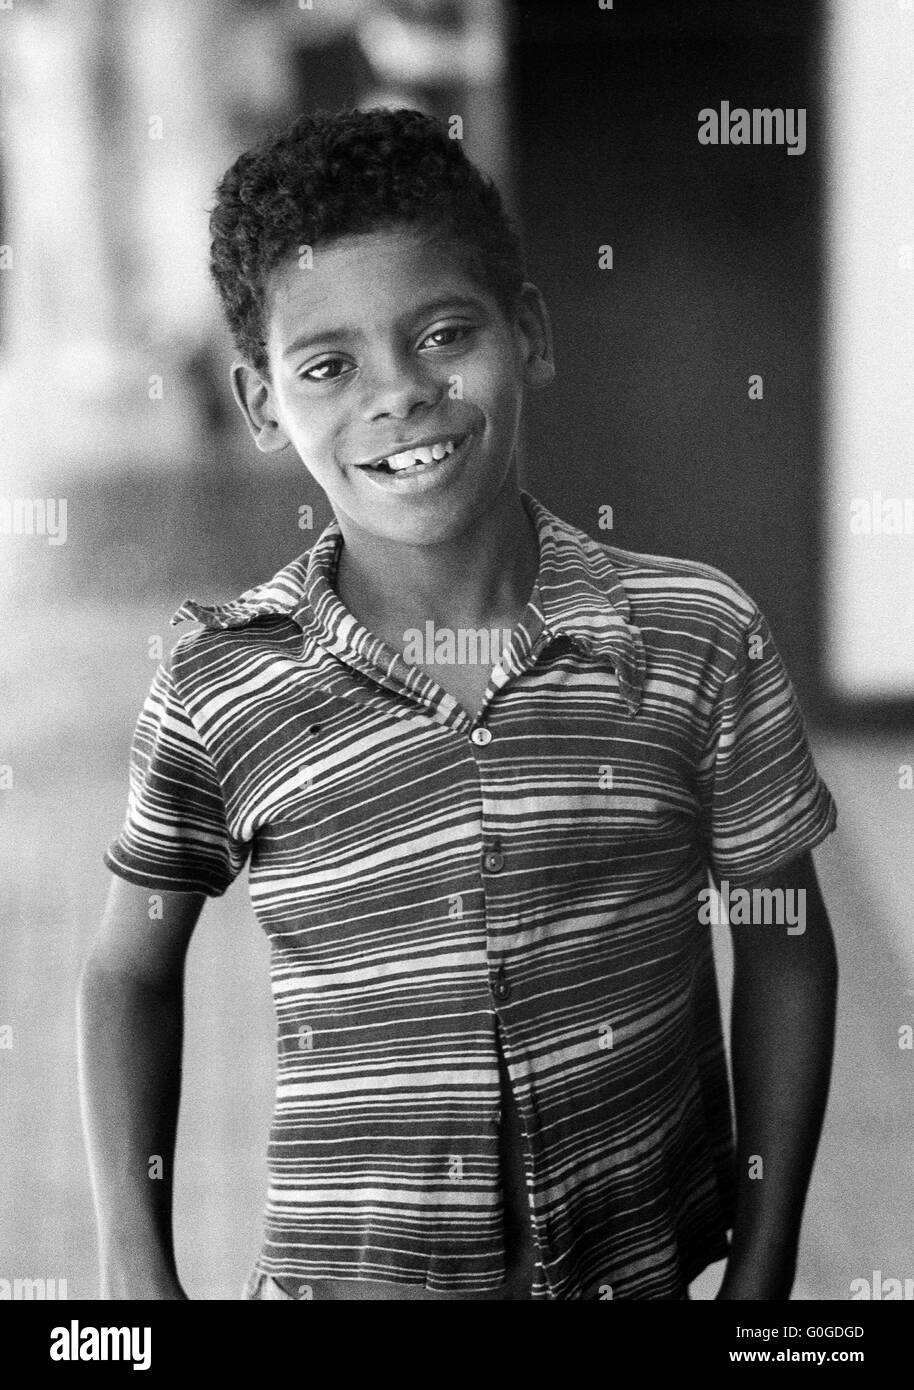 Seventies, black and white photo, people, boy 12 to 15 years, Brazilian, mulatto, short-haired, smiling, T-shirt Stock Photo